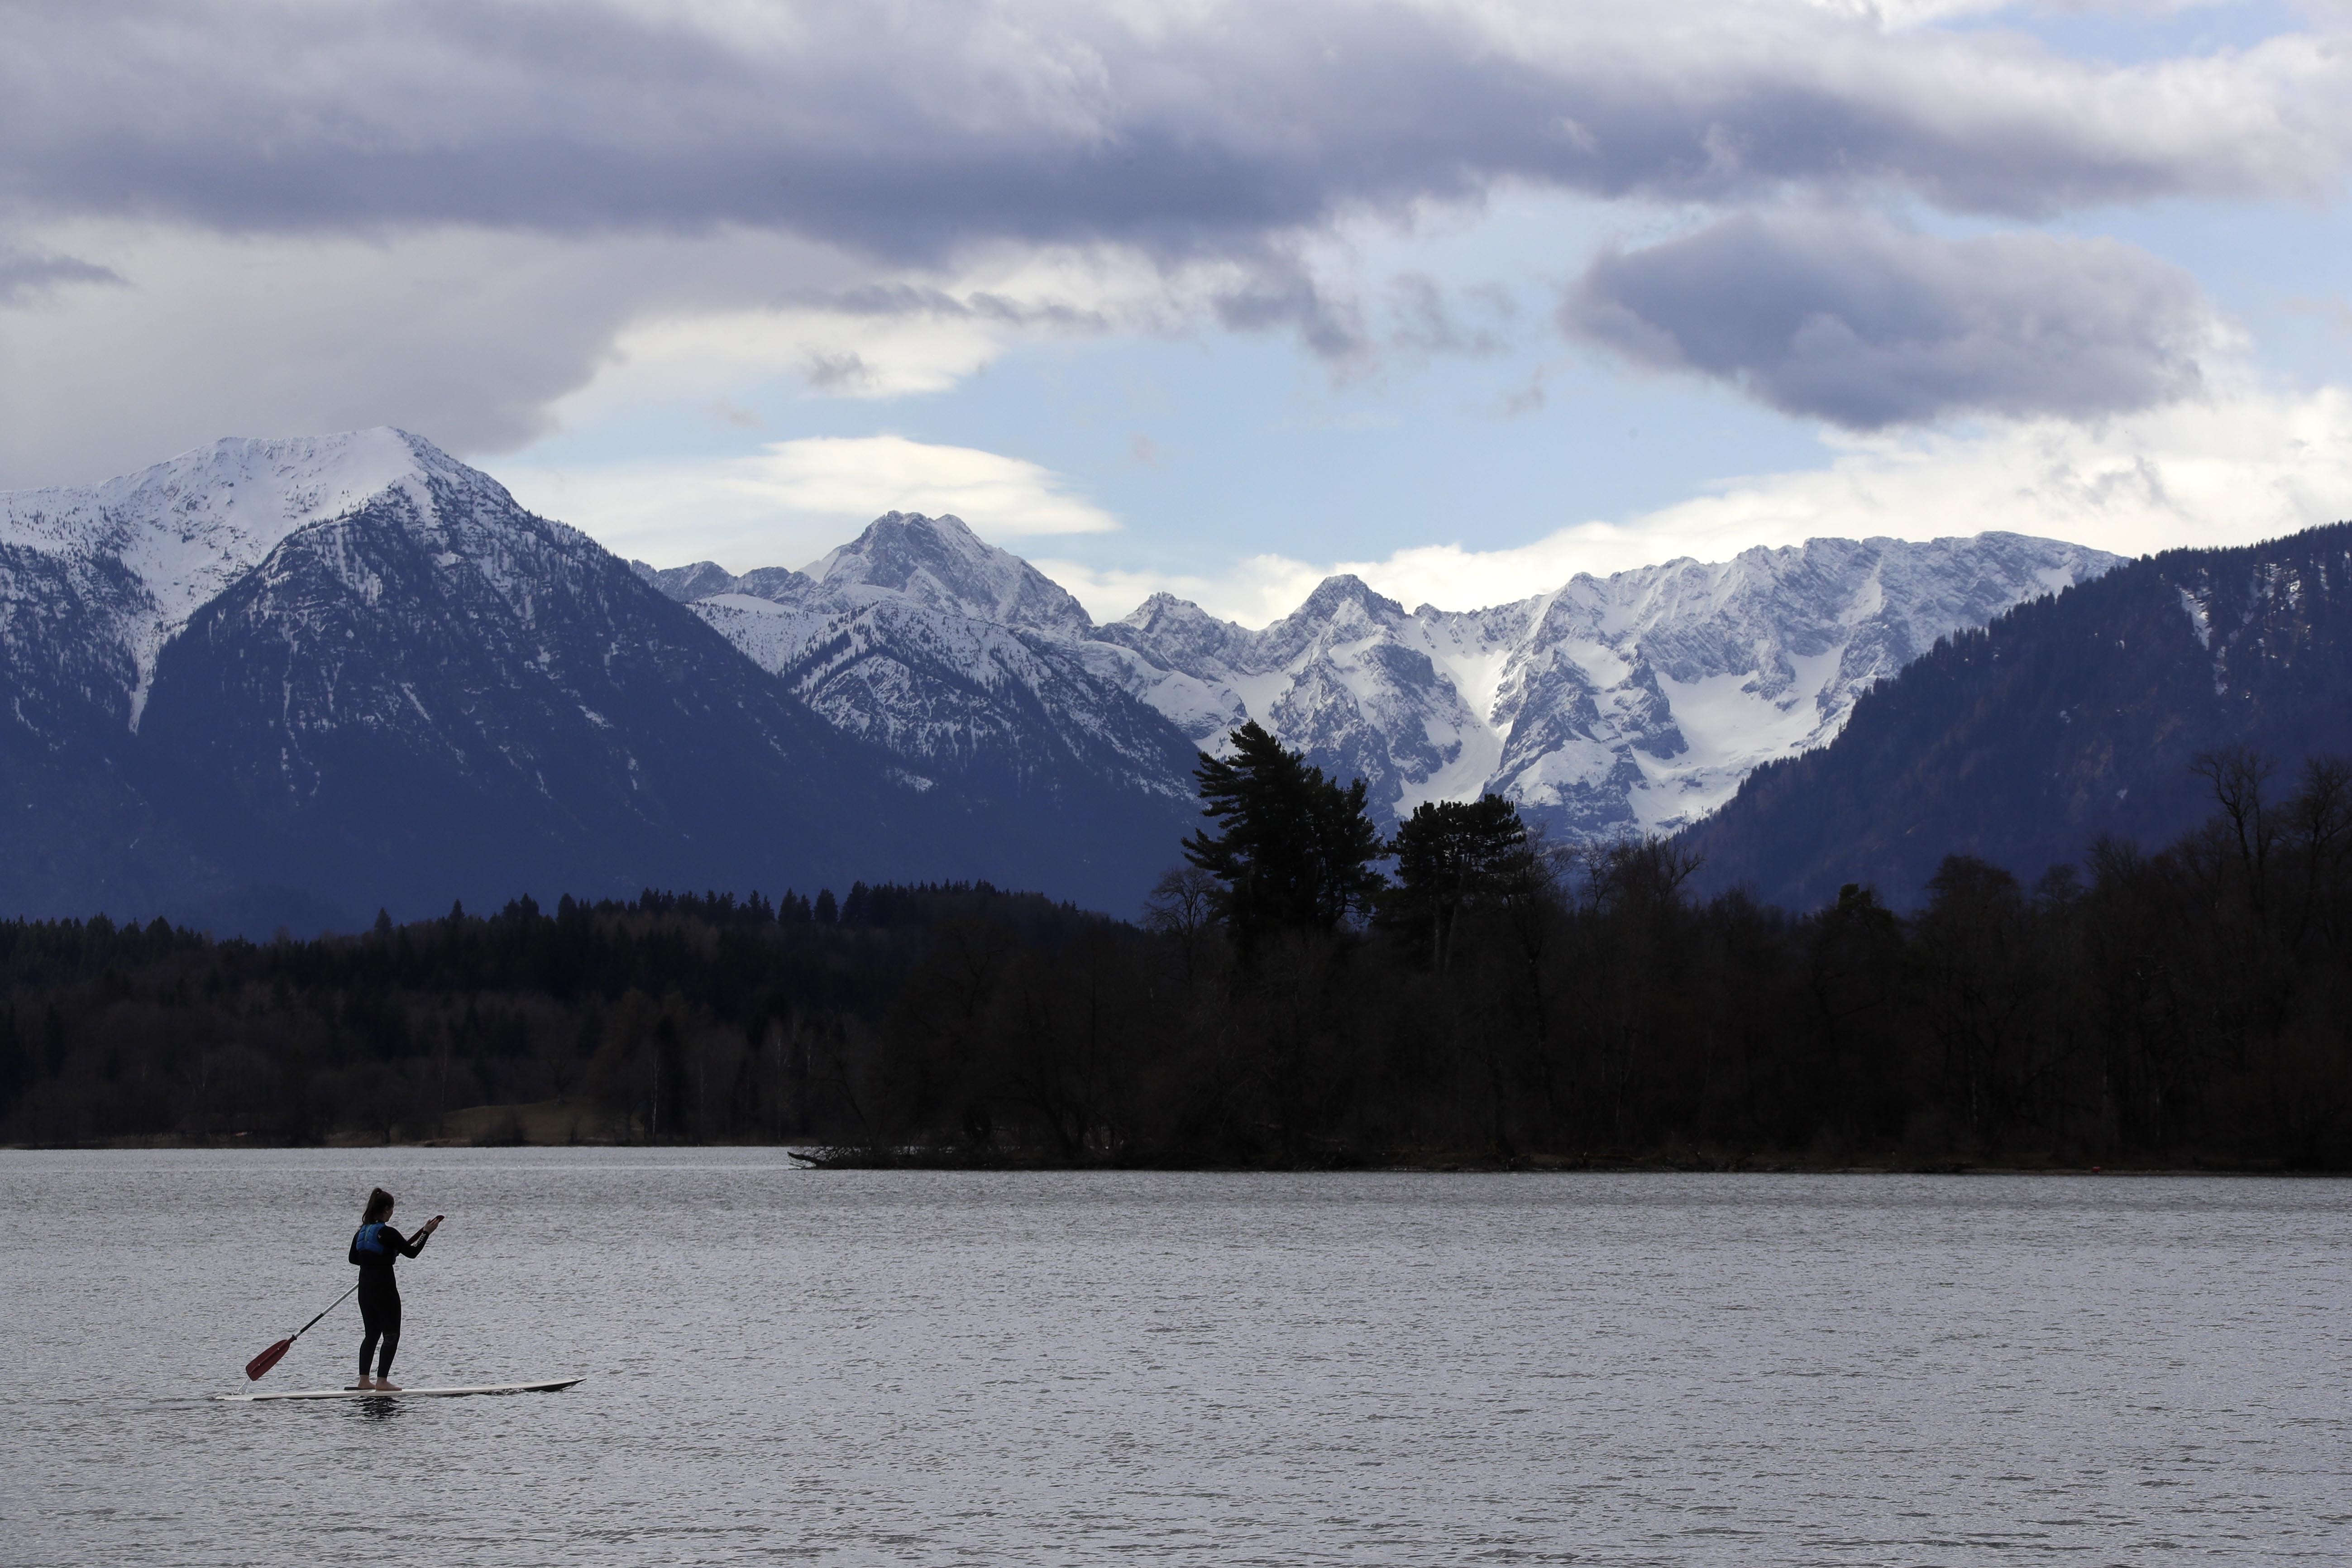 A stand-up paddler makes her way on lake Staffelsee in front of the Alps in Uffing near Garmisch-Partenkirchen, Germany, Thursday, April 5, 2018. (AP Photo/Matthias Schrader)